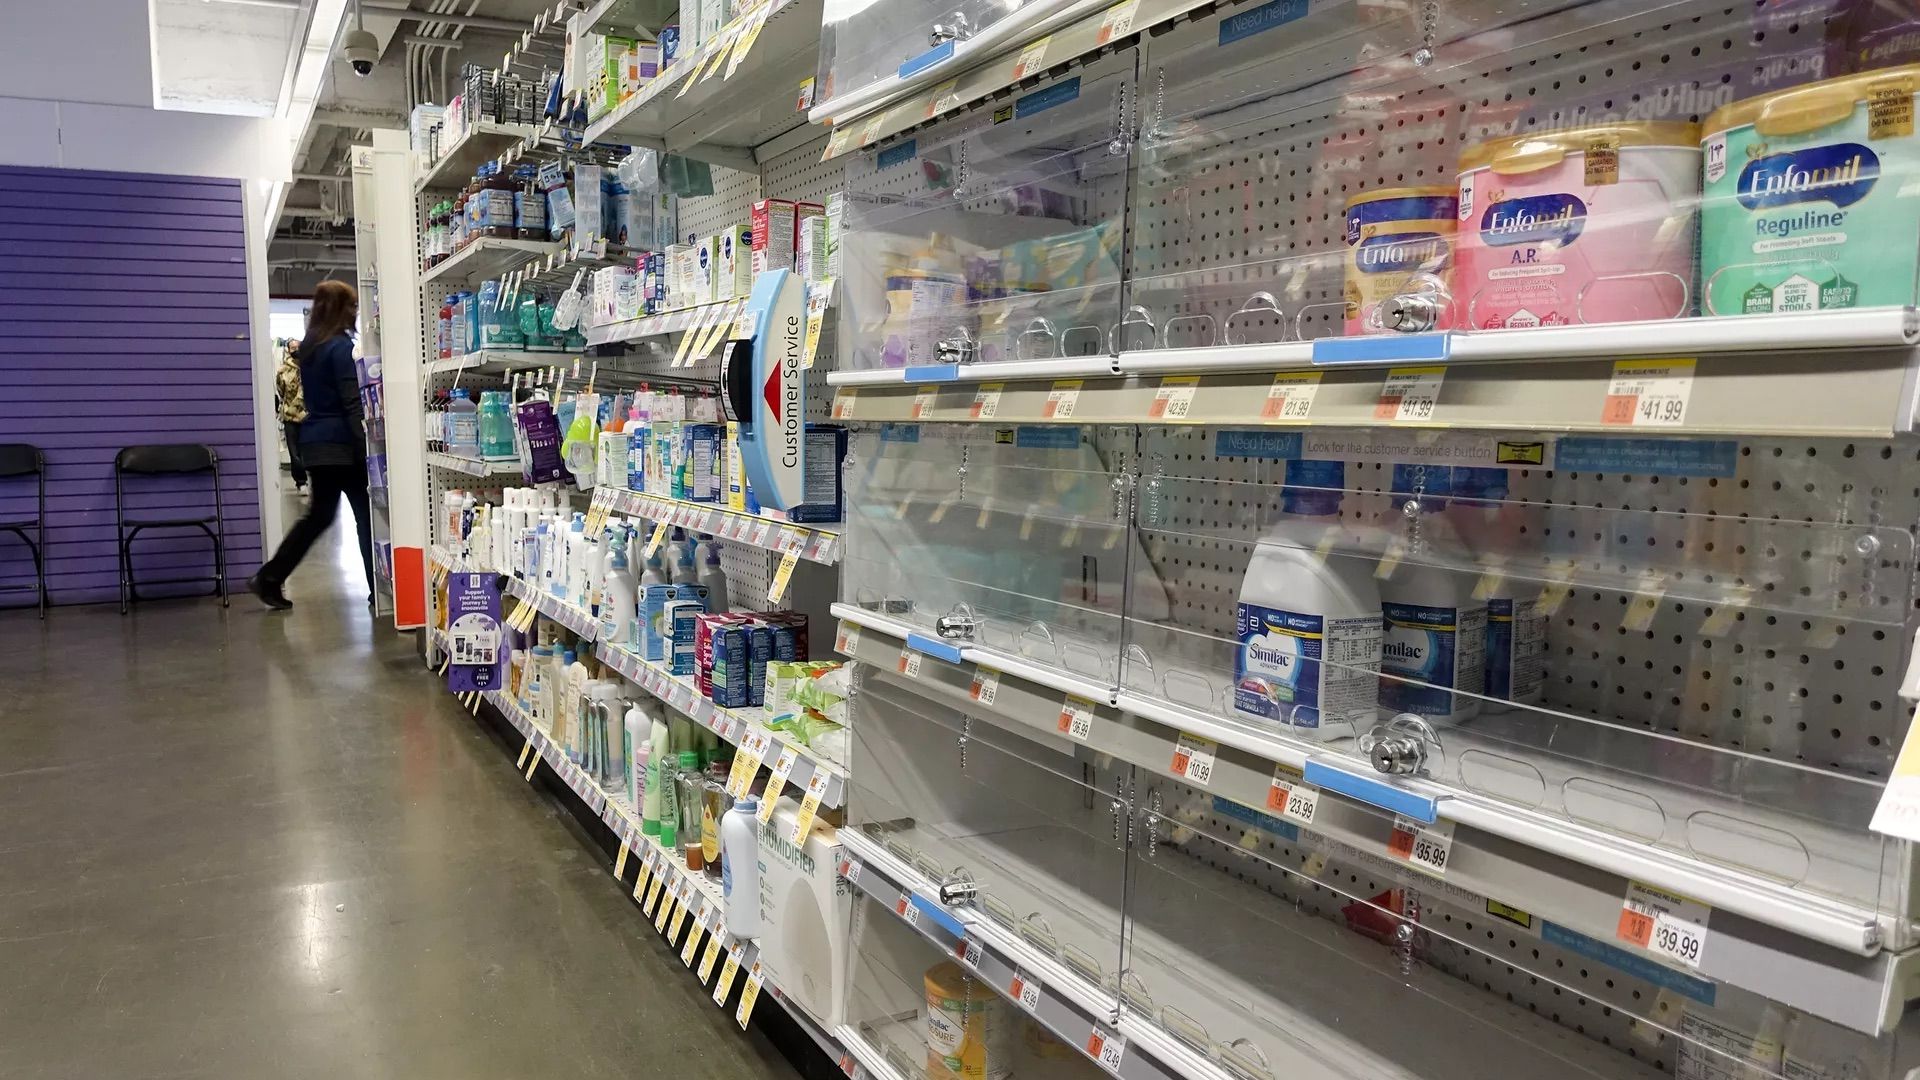 A nearly empty baby formula display shelf is seen at a Walgreens pharmacy